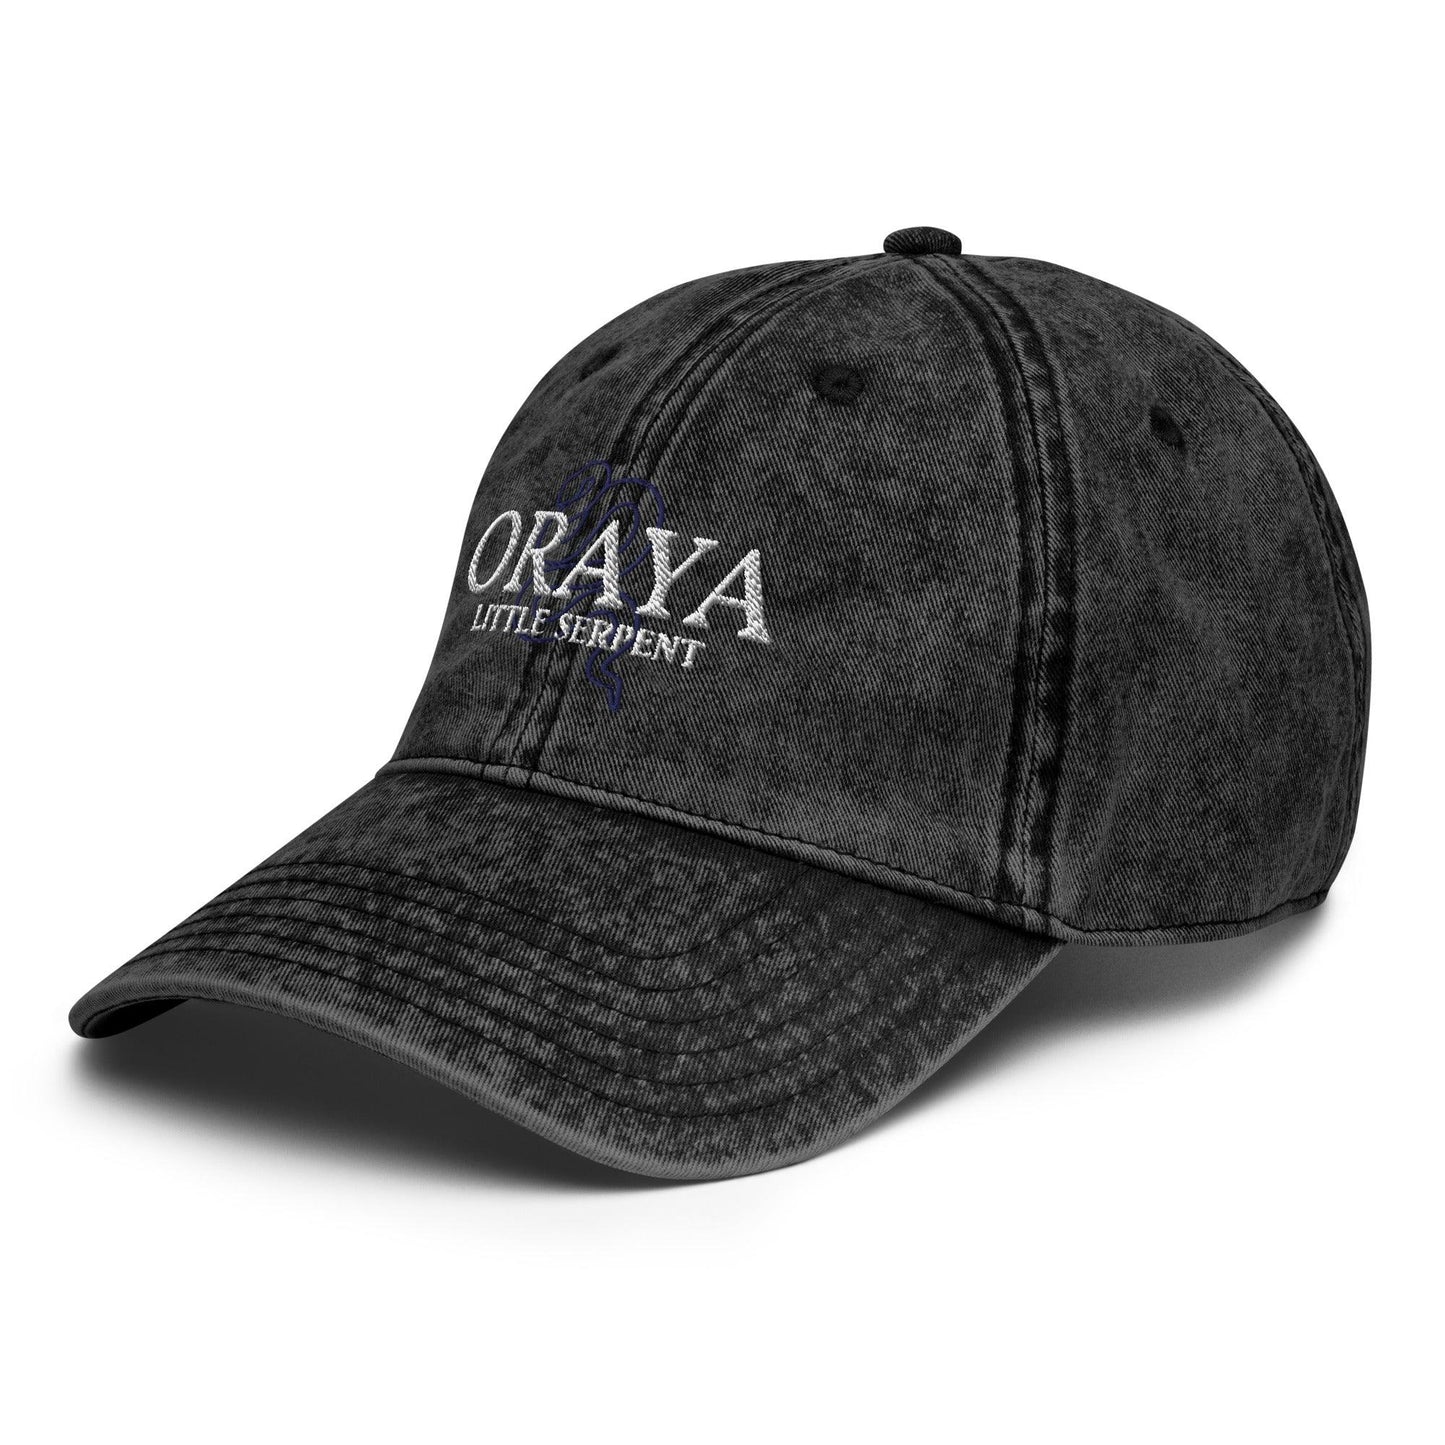 Oraya Embroidered Hat - The Bean Workshop - cap, carissa broadbent, embroidered, hat, the serpent and the wings of night